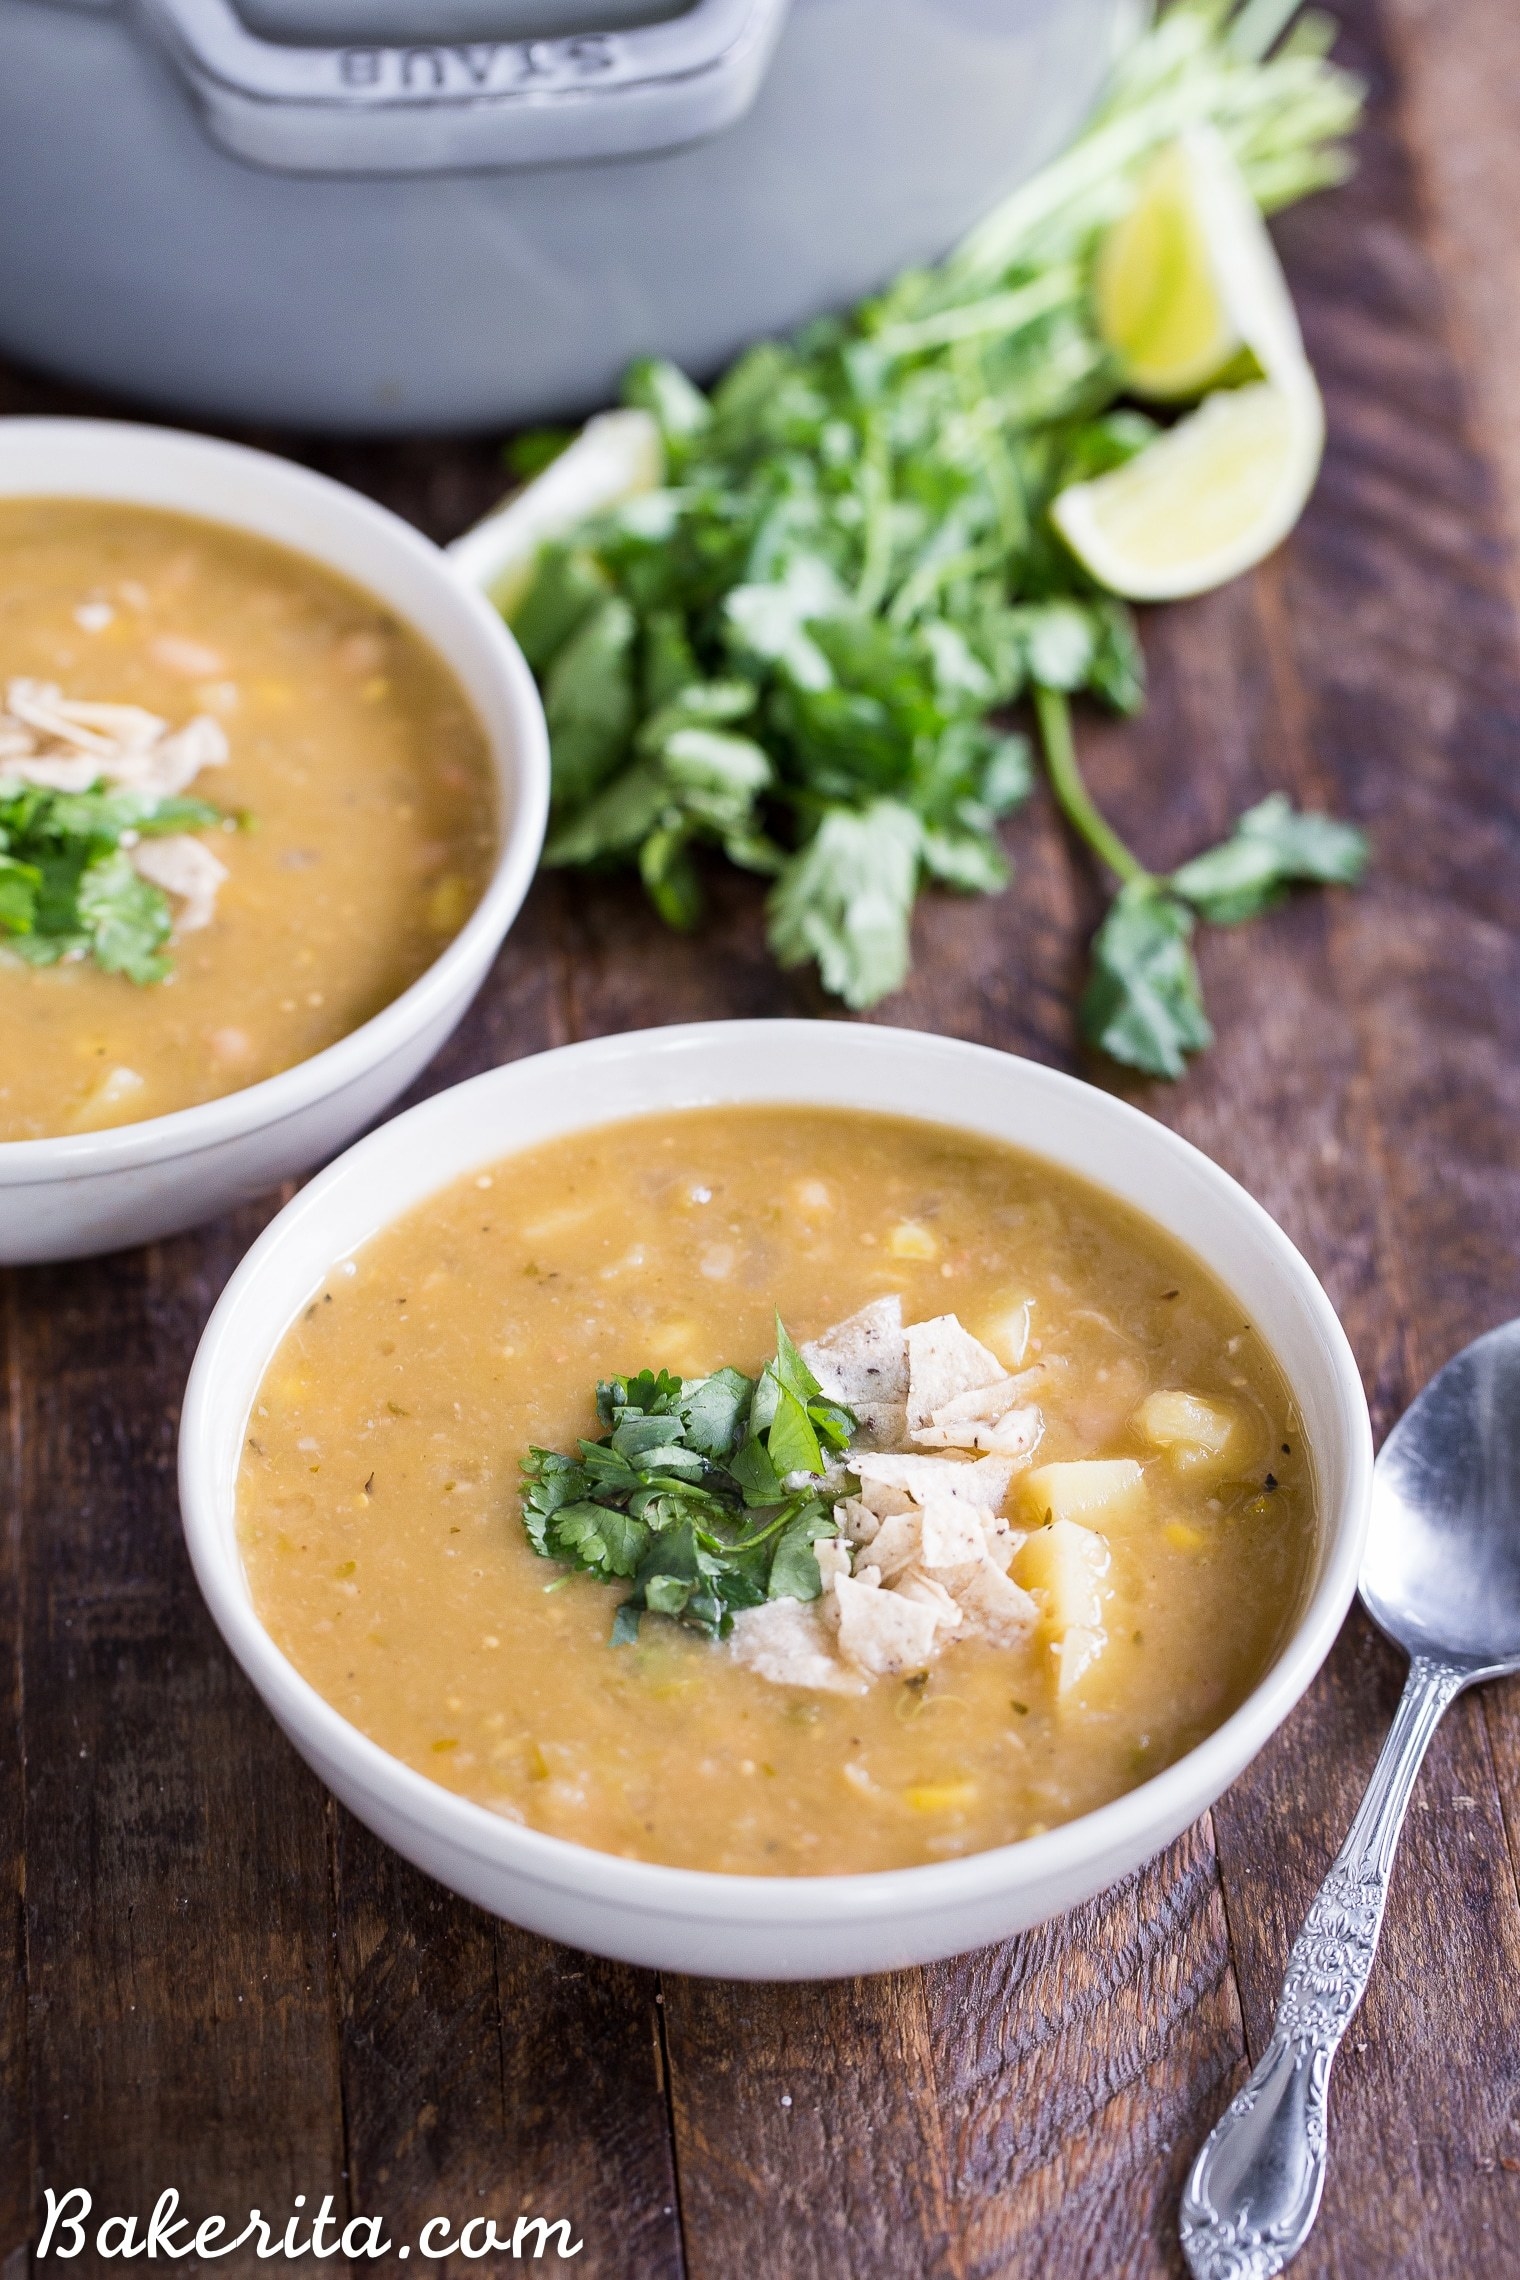 19 White Chicken Chili Recipes That Are Packed With Protein